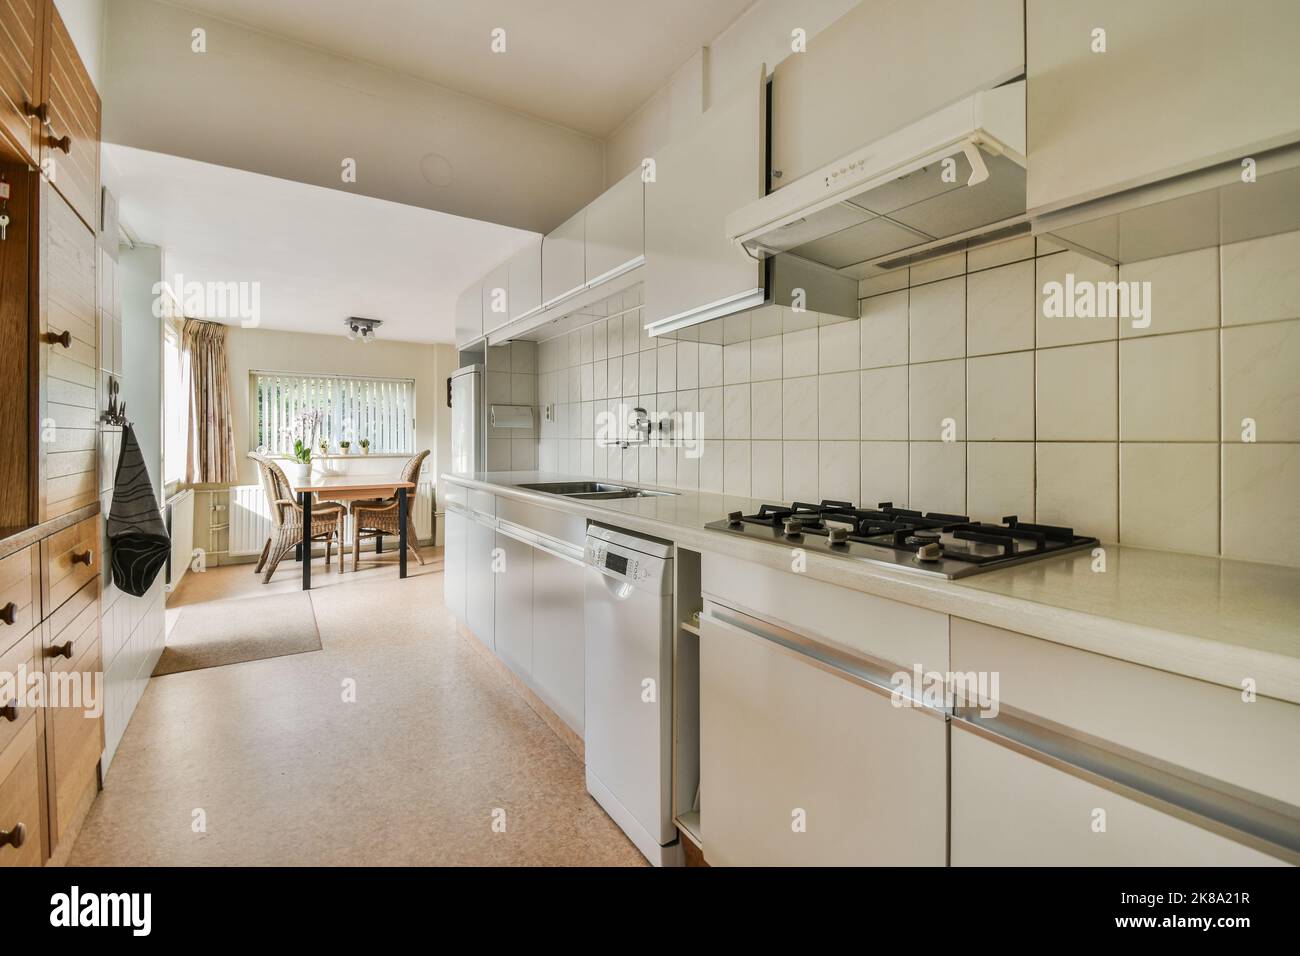 Counters with stove and oven located in modern kitchen near dining room at home Stock Photo